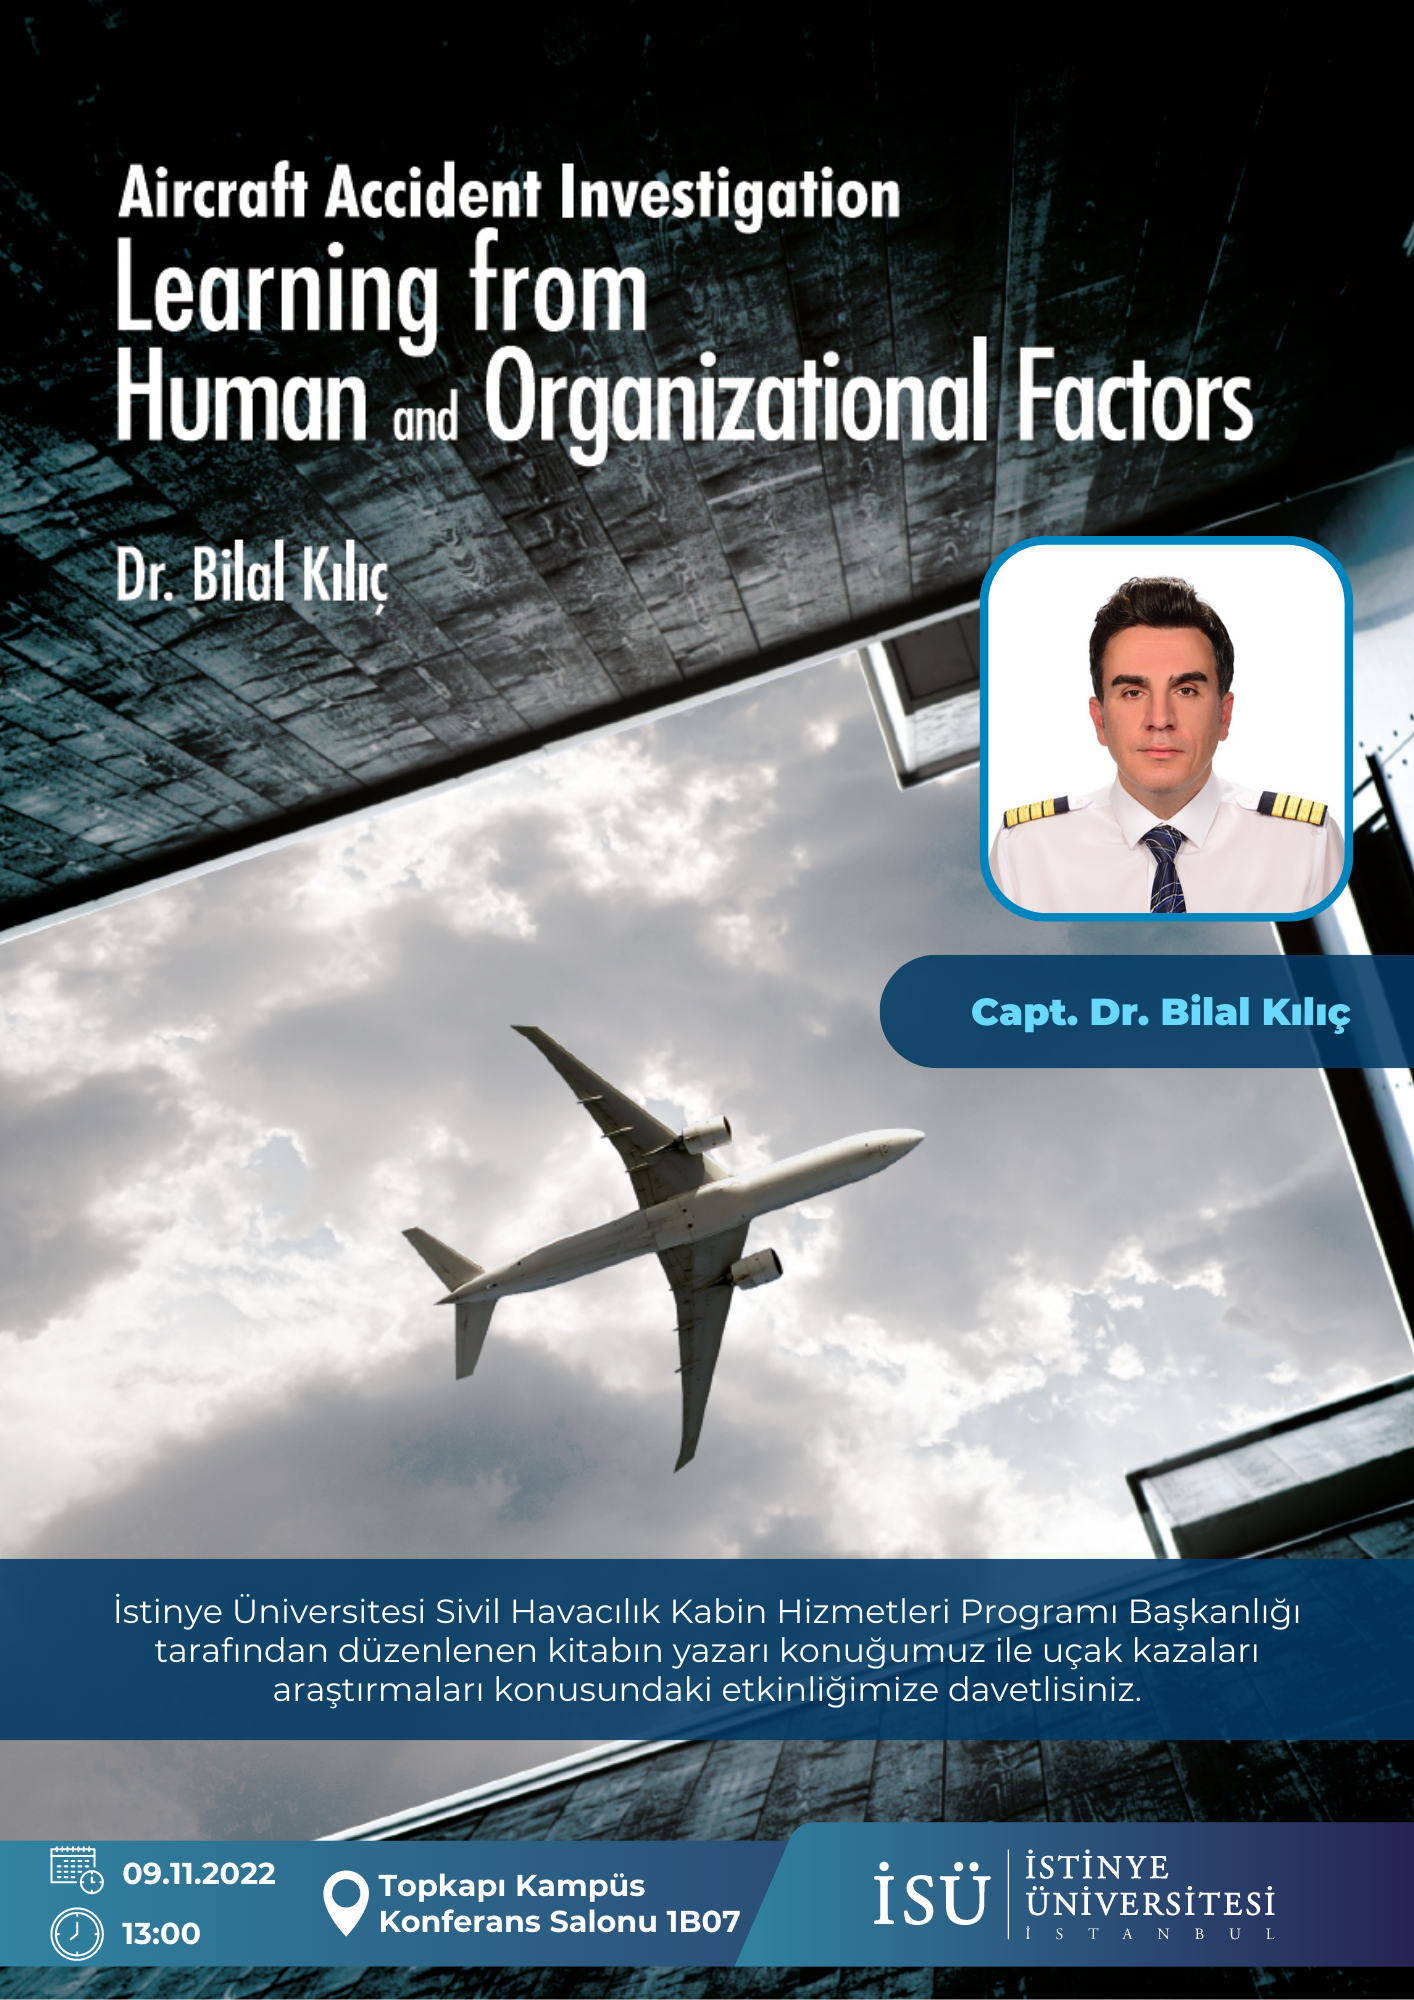 Aircraft Accident Investigation Learning from Human and Organizational Factors